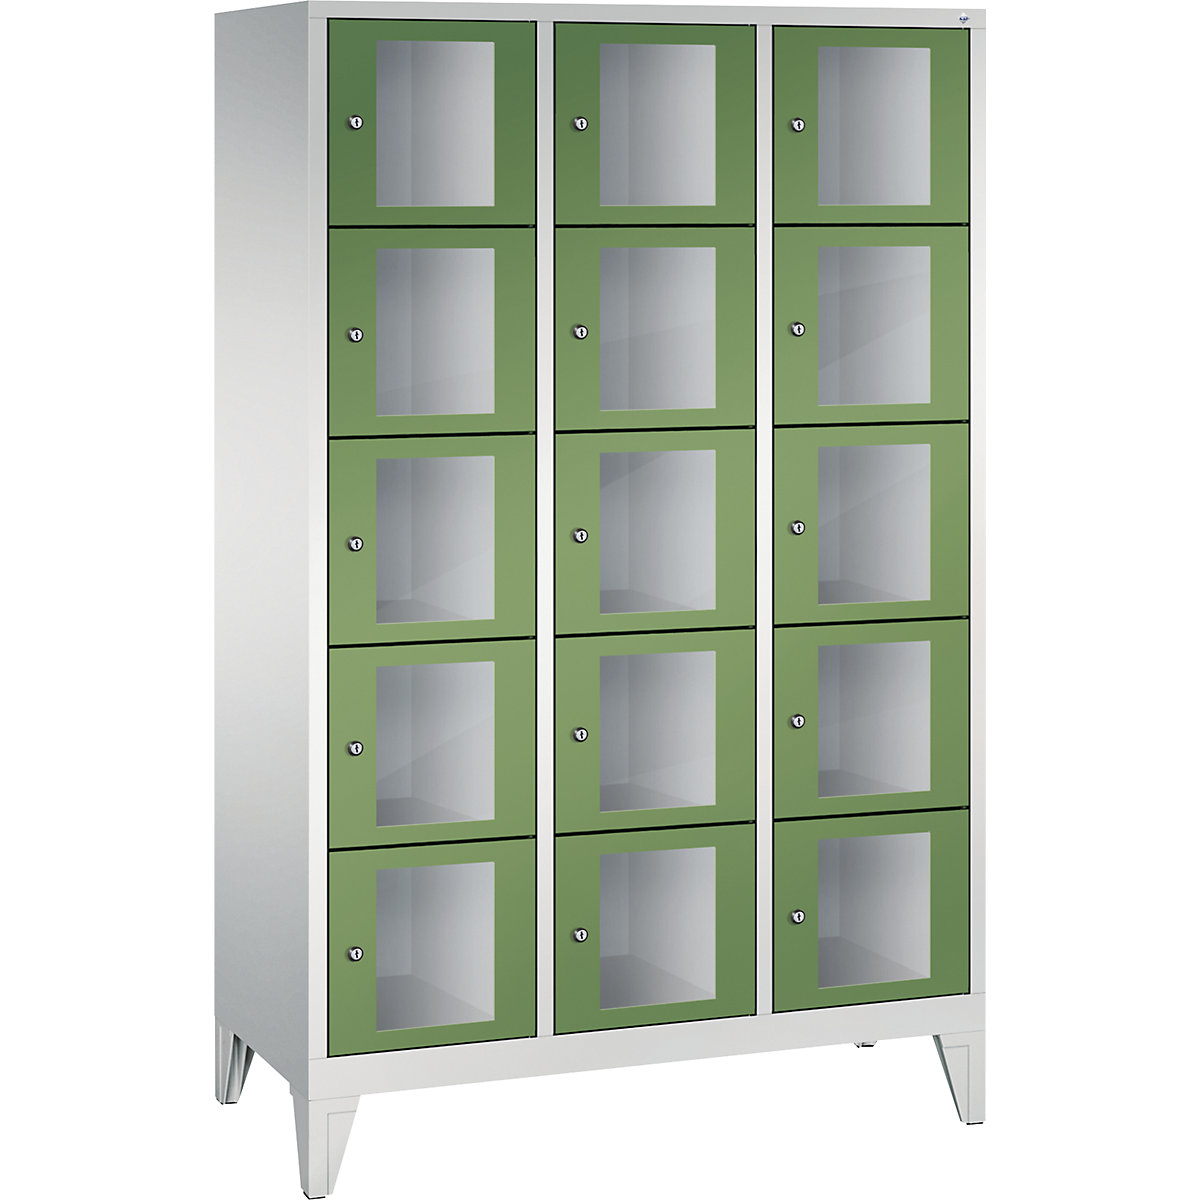 C+P – CLASSIC locker unit, compartment height 295 mm, with feet, 15 compartments, width 1200 mm, reseda green door